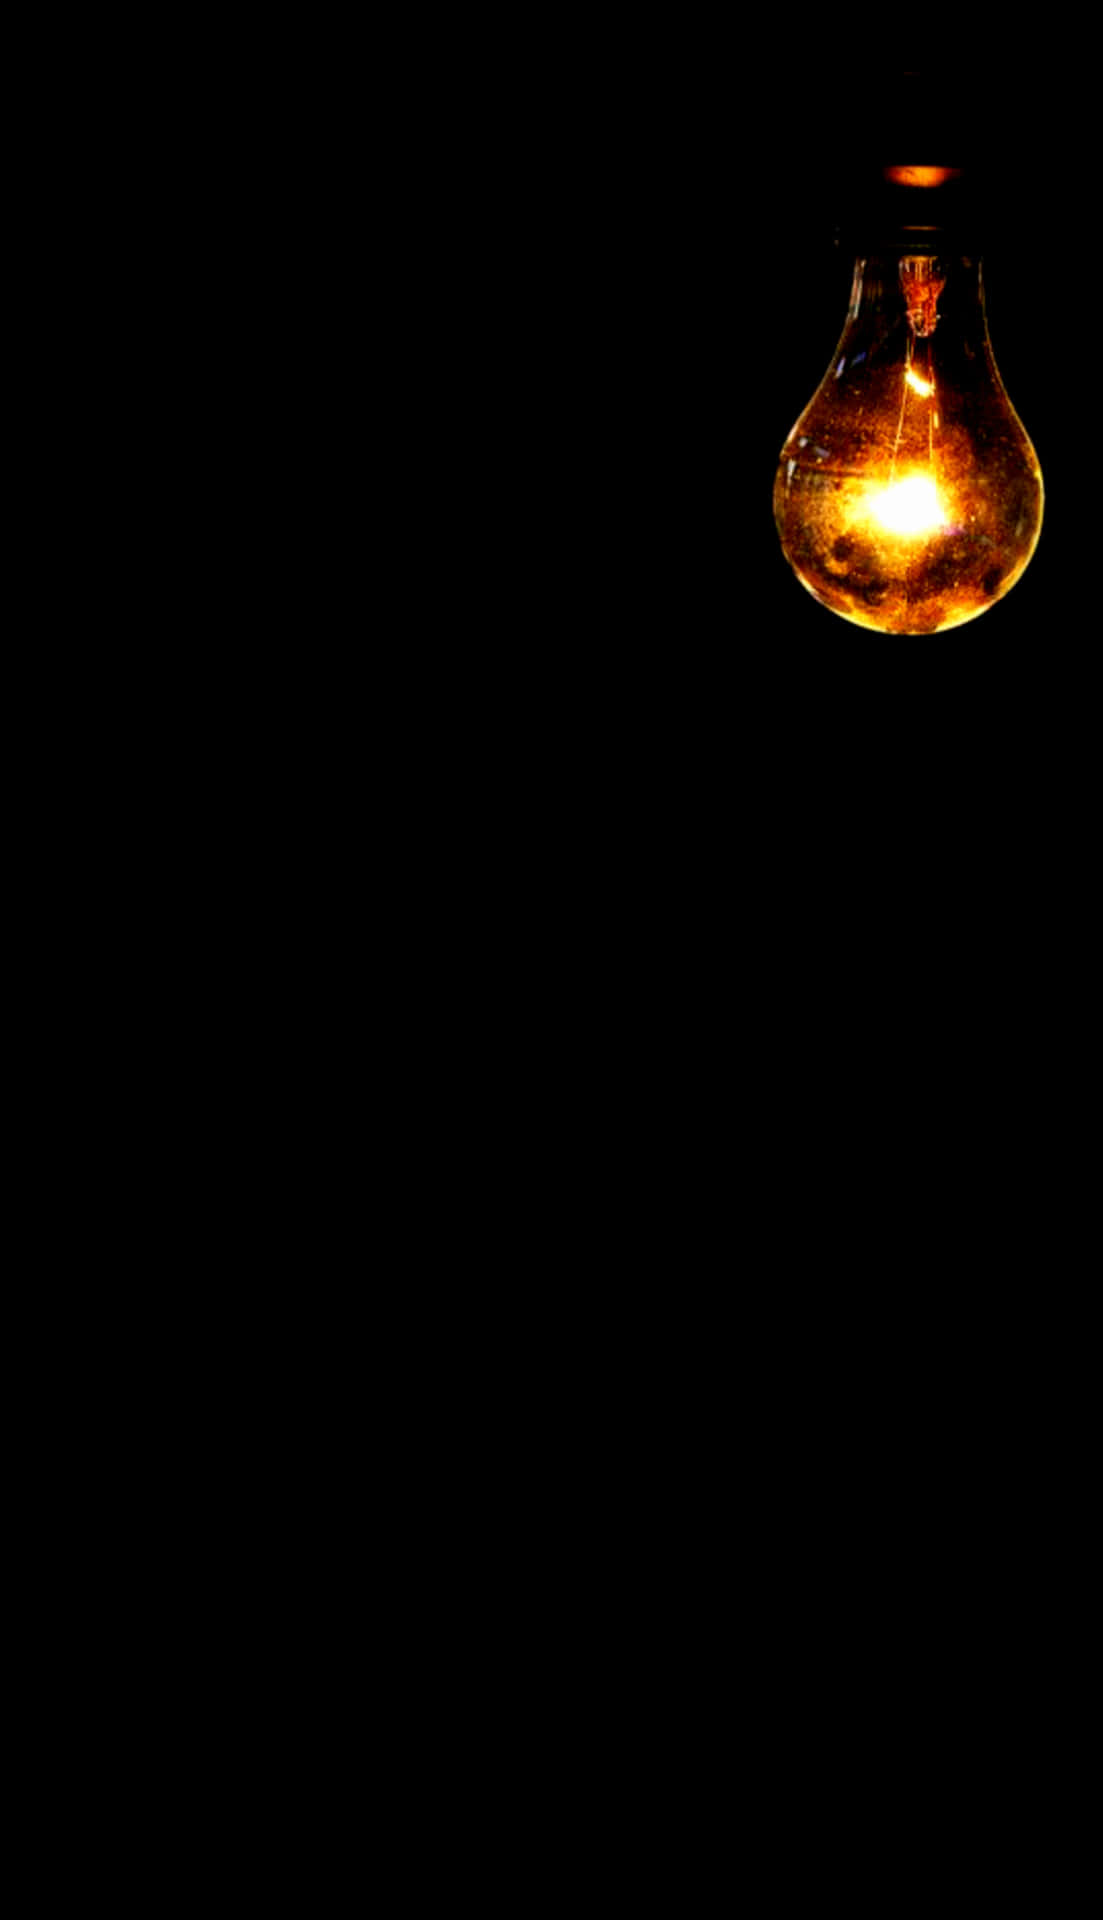 A Light Bulb Is Lit Up In The Dark Background